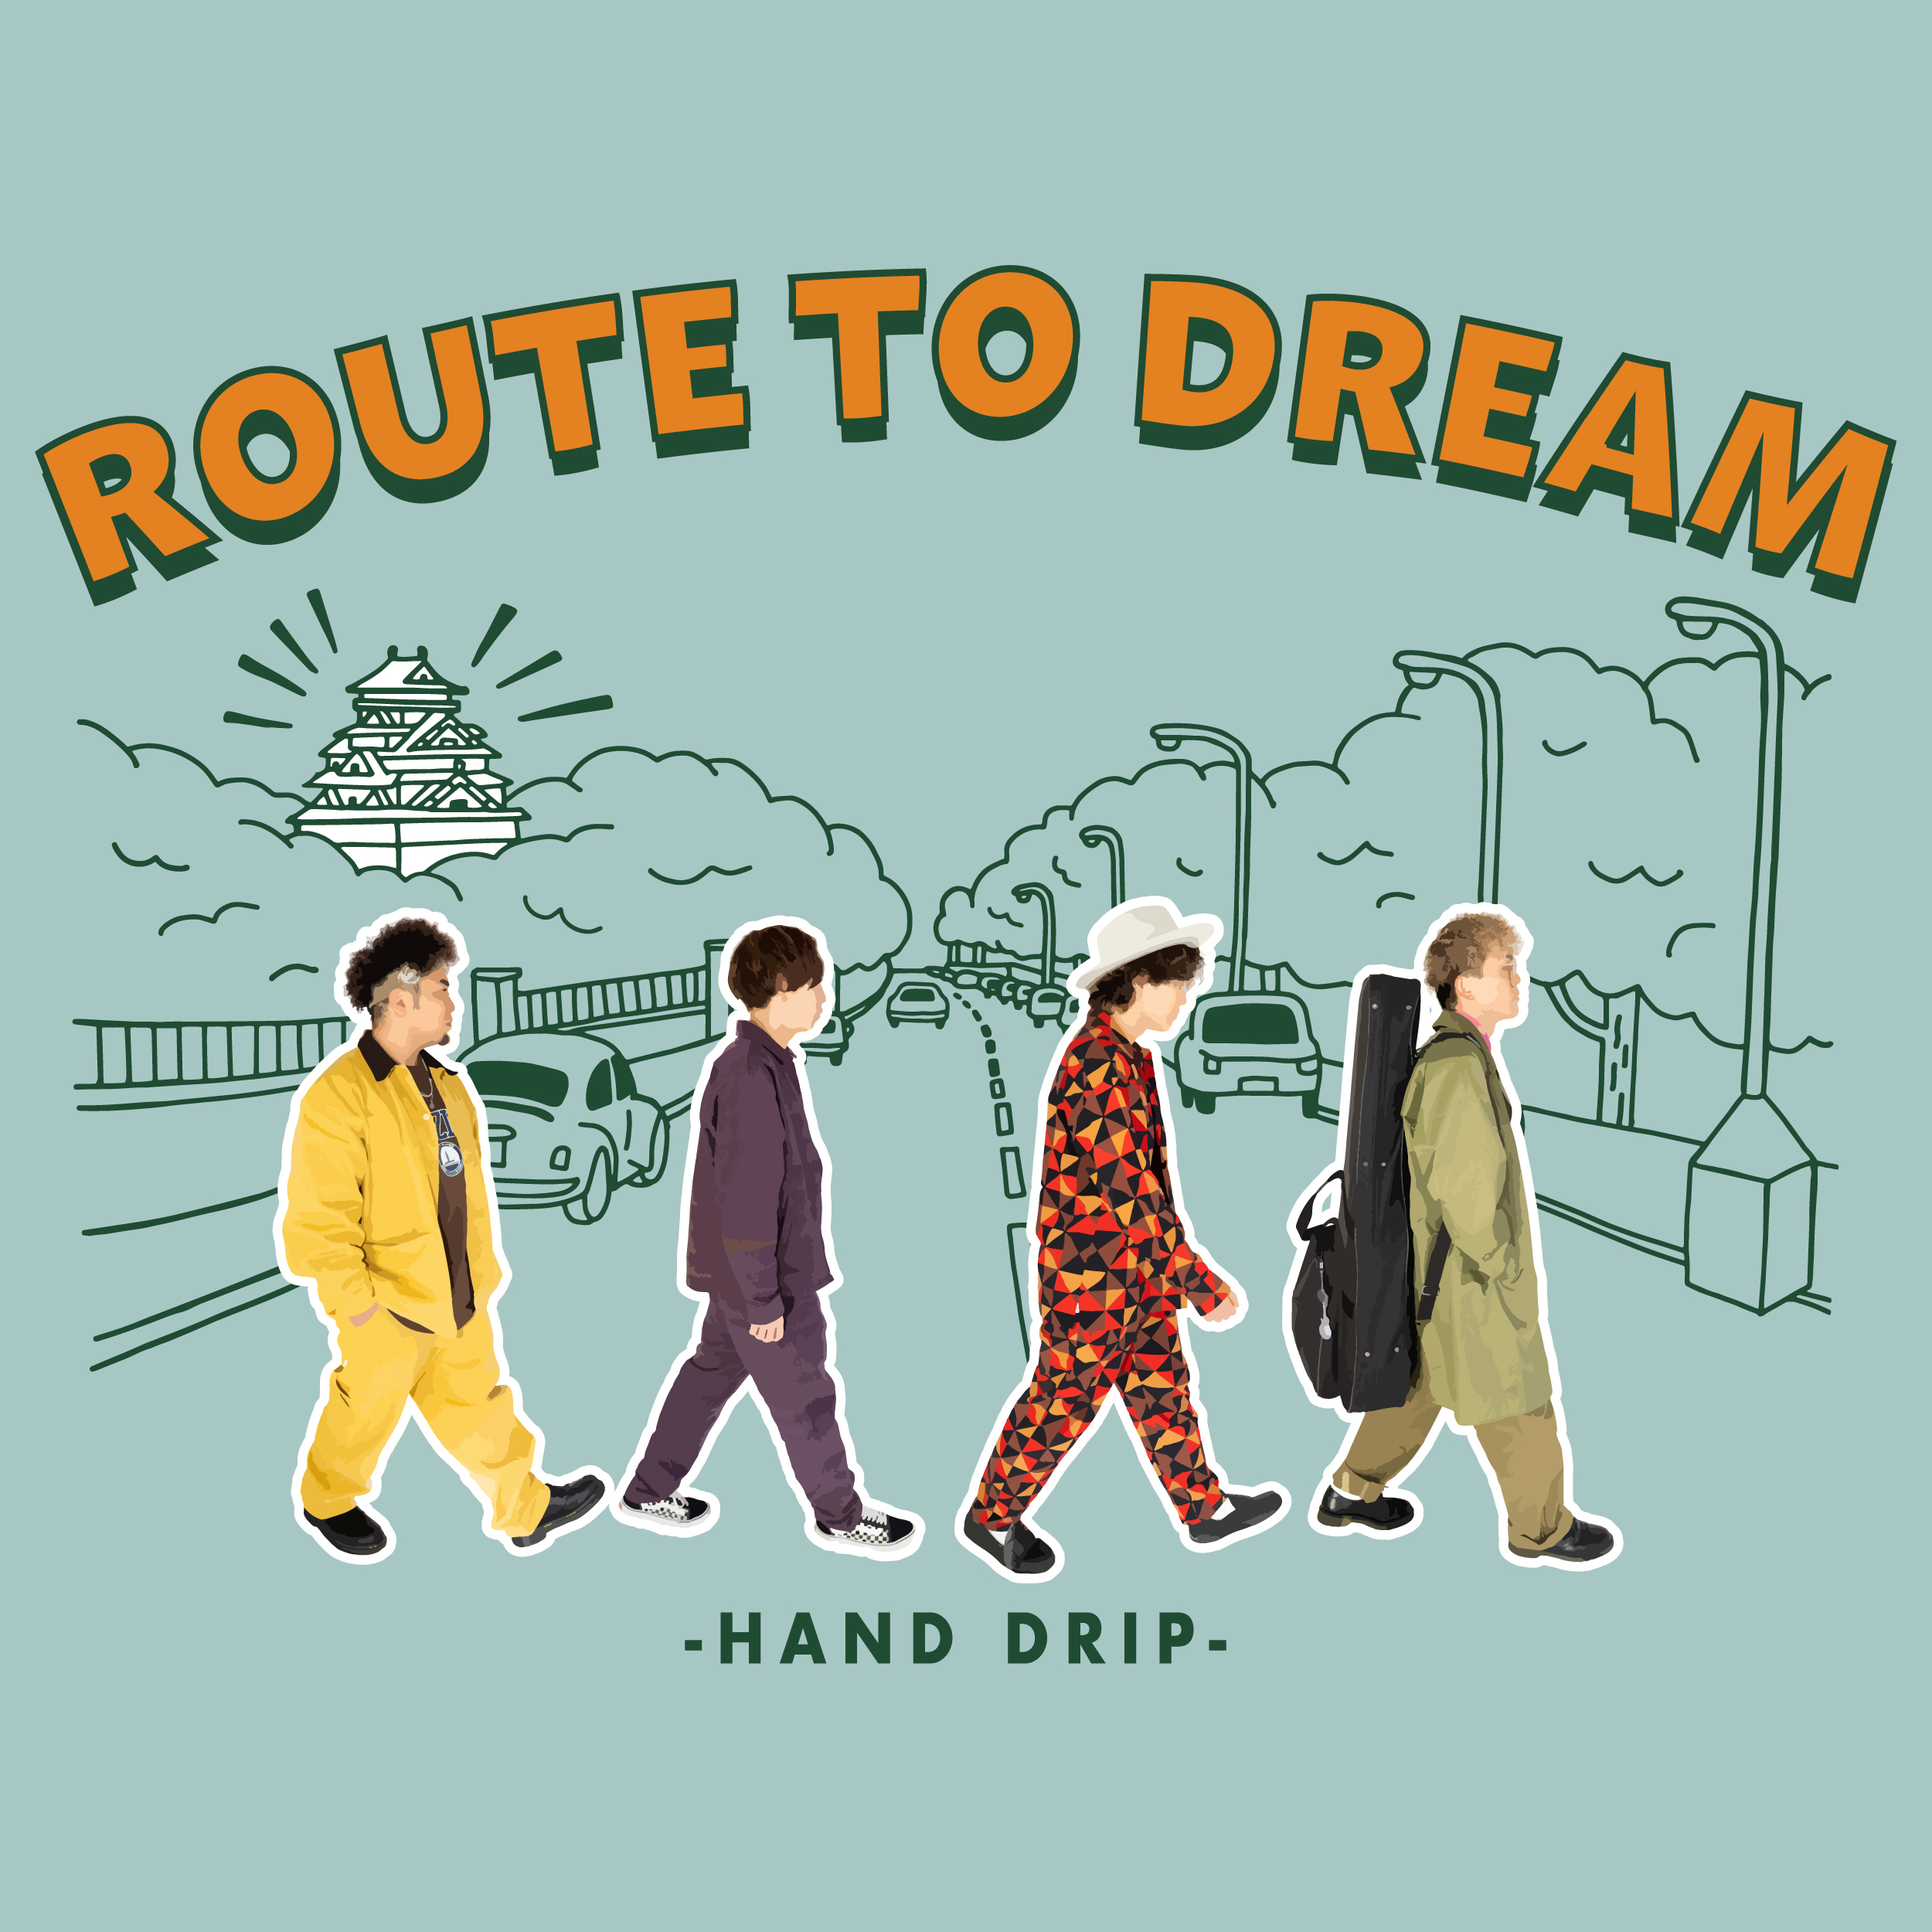 「ROUTE TO DREAM」